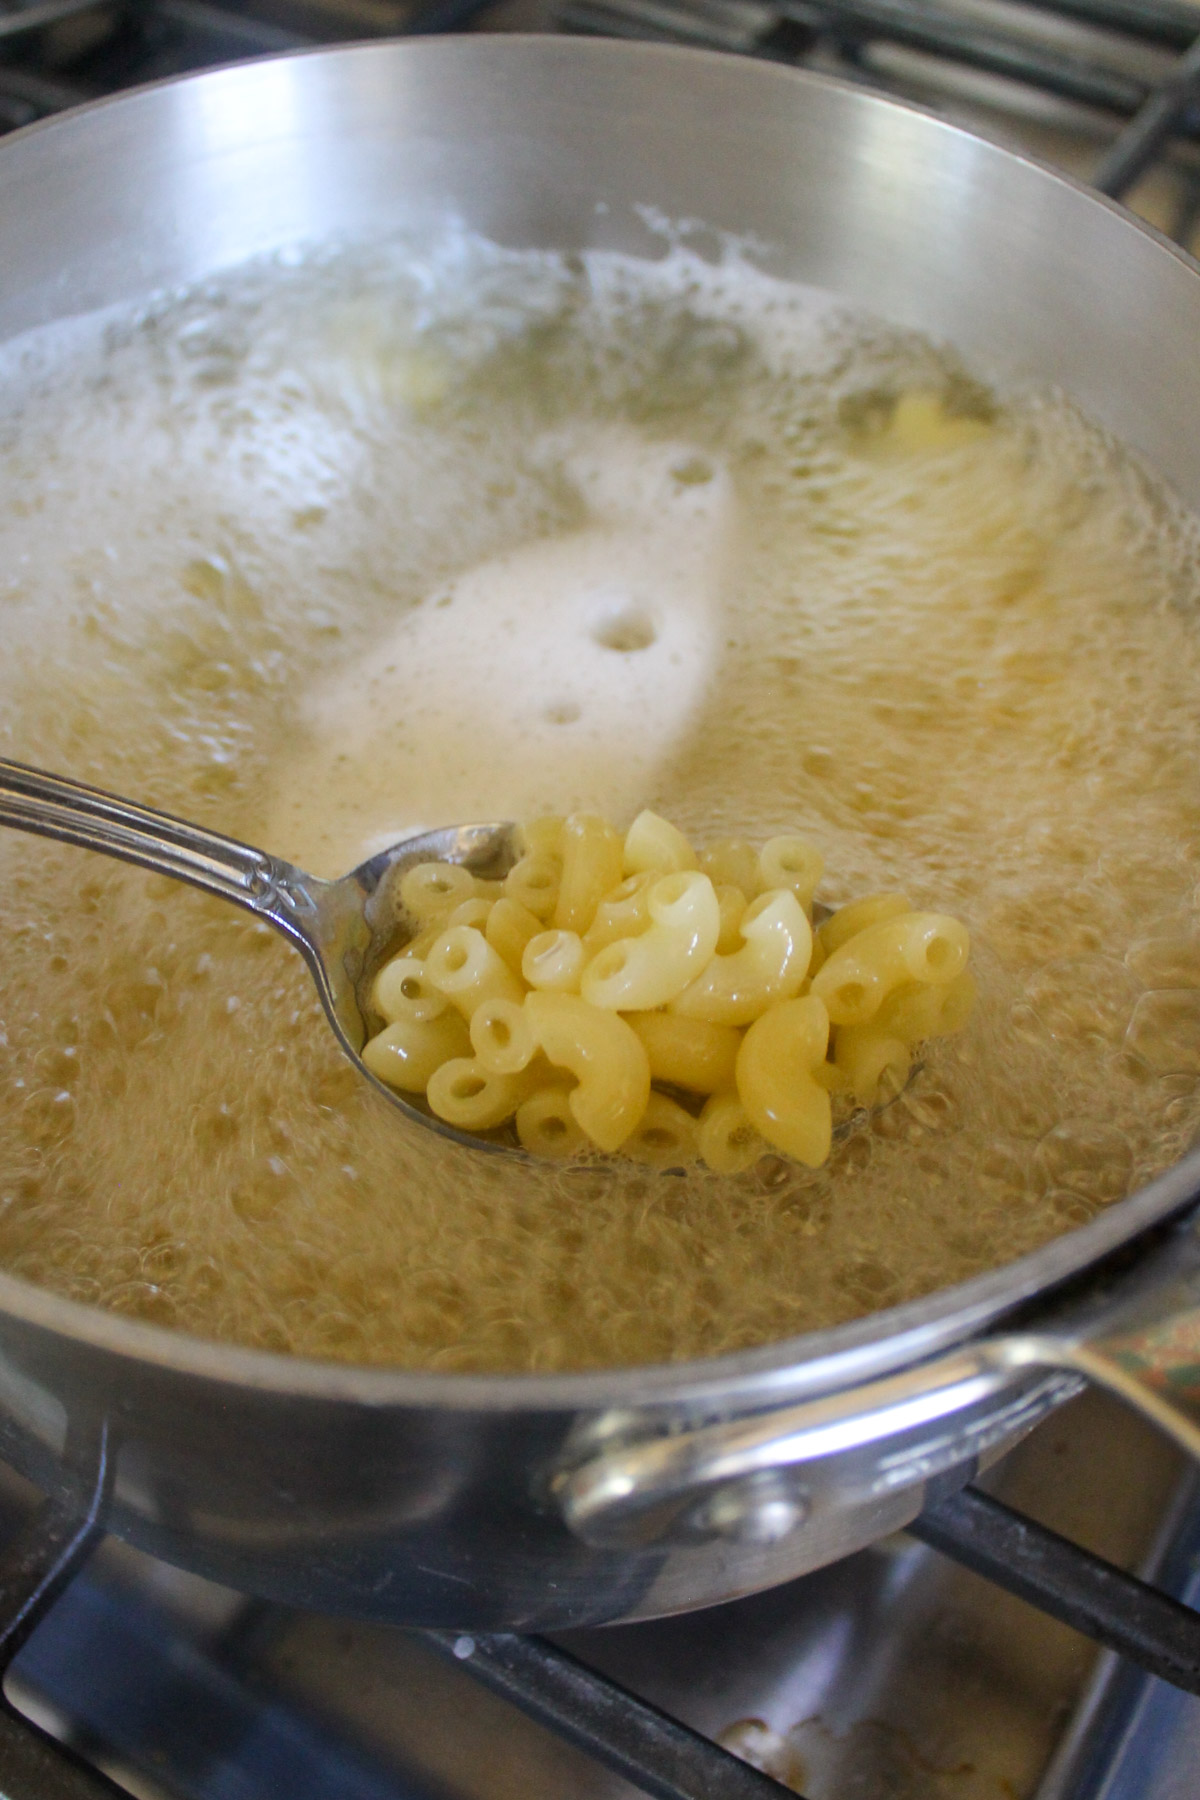 Macaroni pasta boiling in water with a spoon scooping some.